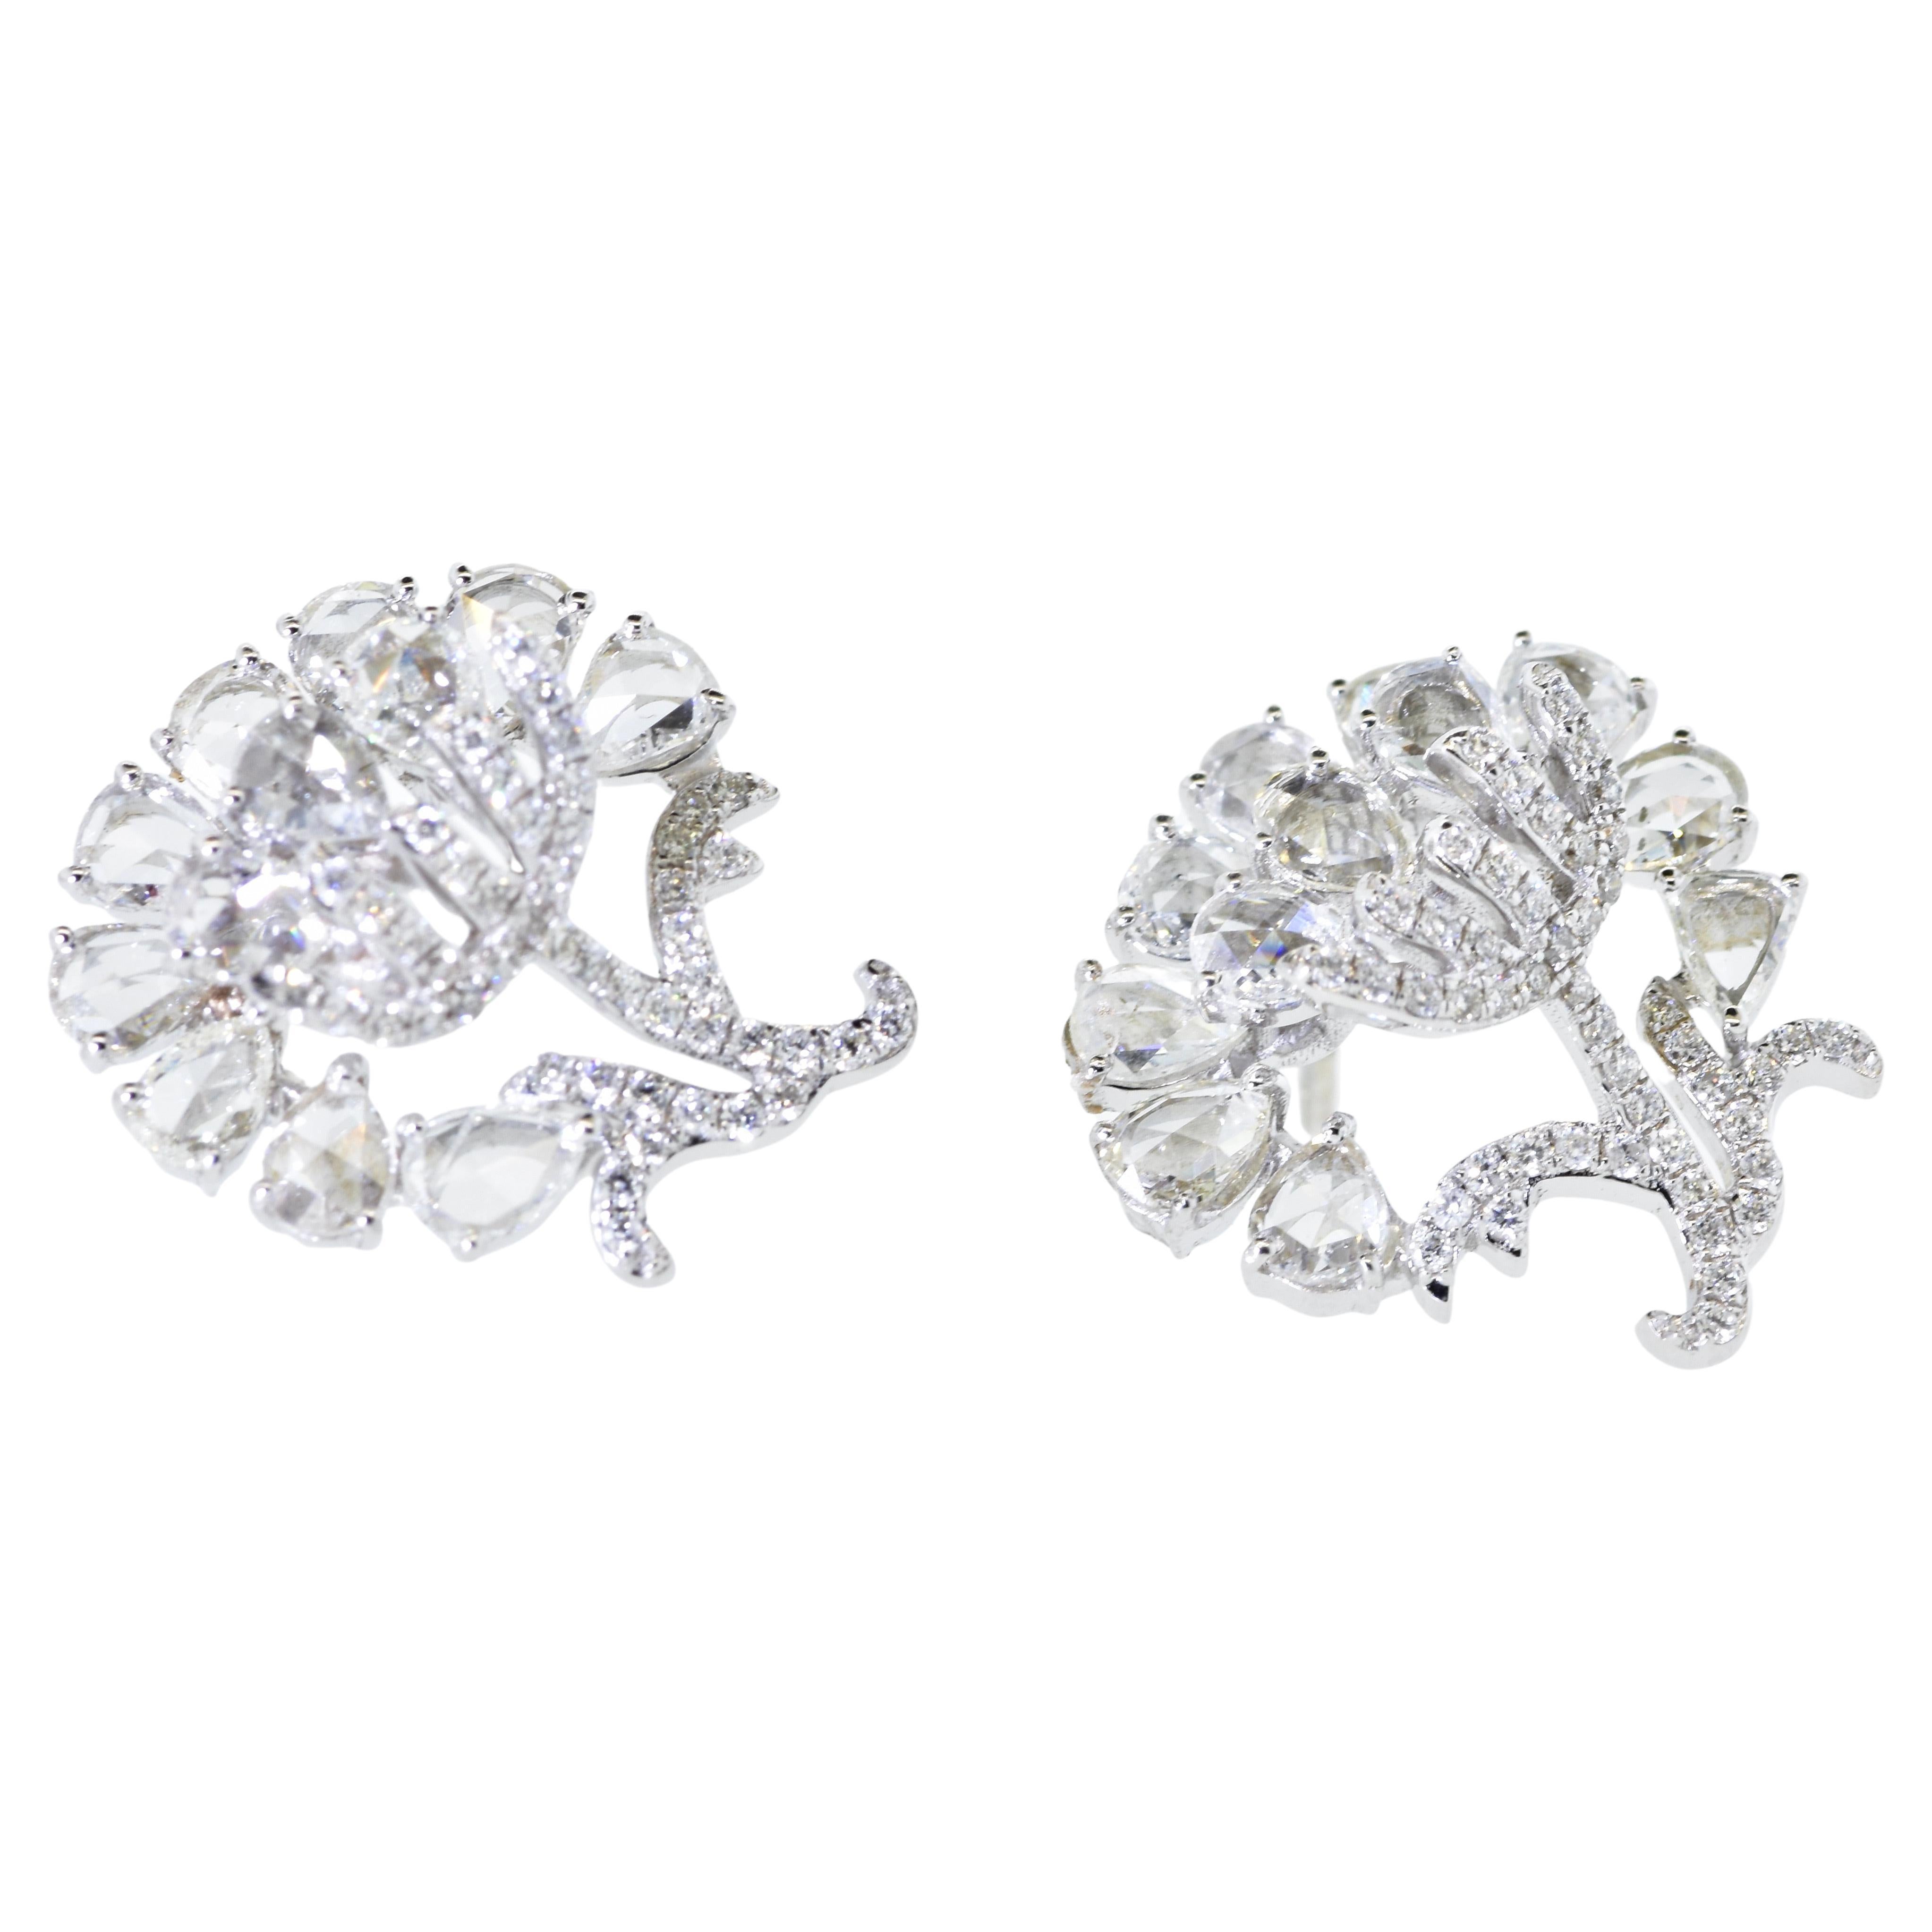 Fine white diamonds are well set in these contemporary flower motif 18K white gold earrings.  There are 3 cts. of diamonds in both the round brilliant cut diamonds and the rose cut diamonds.  The diamonds are near colorless and very slightly